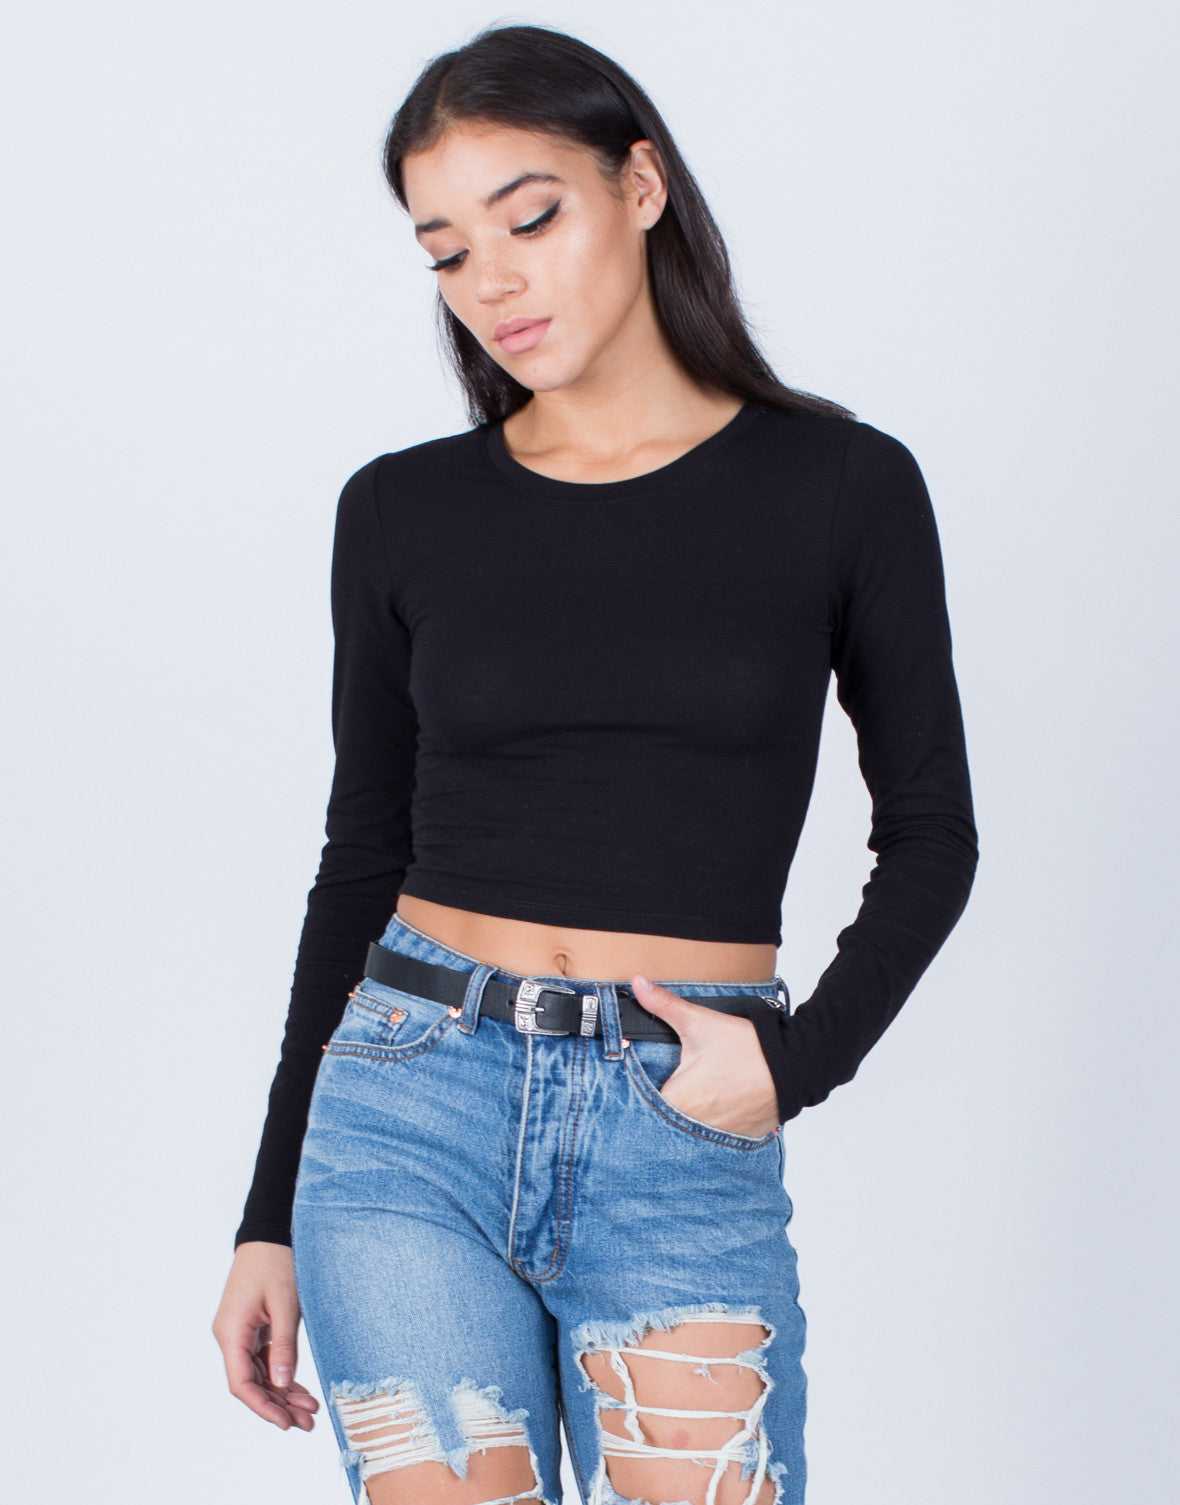 Basic Long Sleeve Crop Top - White Tee - Round Neck Top - Cropped Tee ...